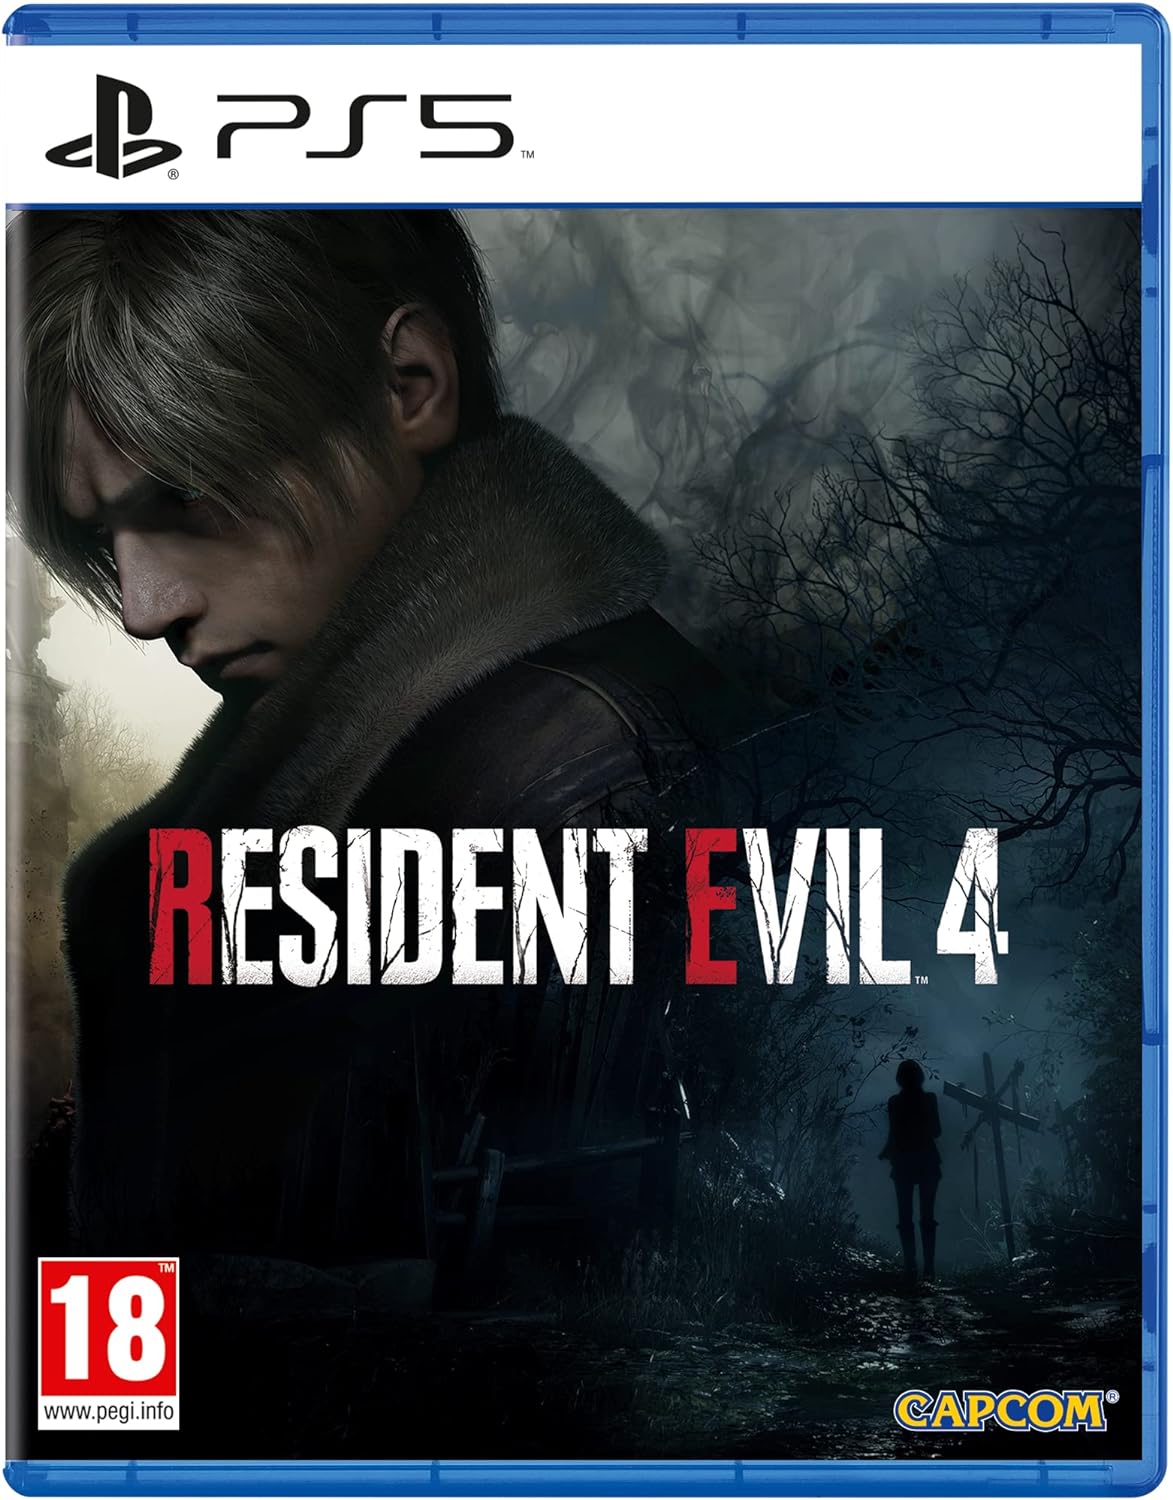 RESIDENT EVIL 4 PS5 - standard edition